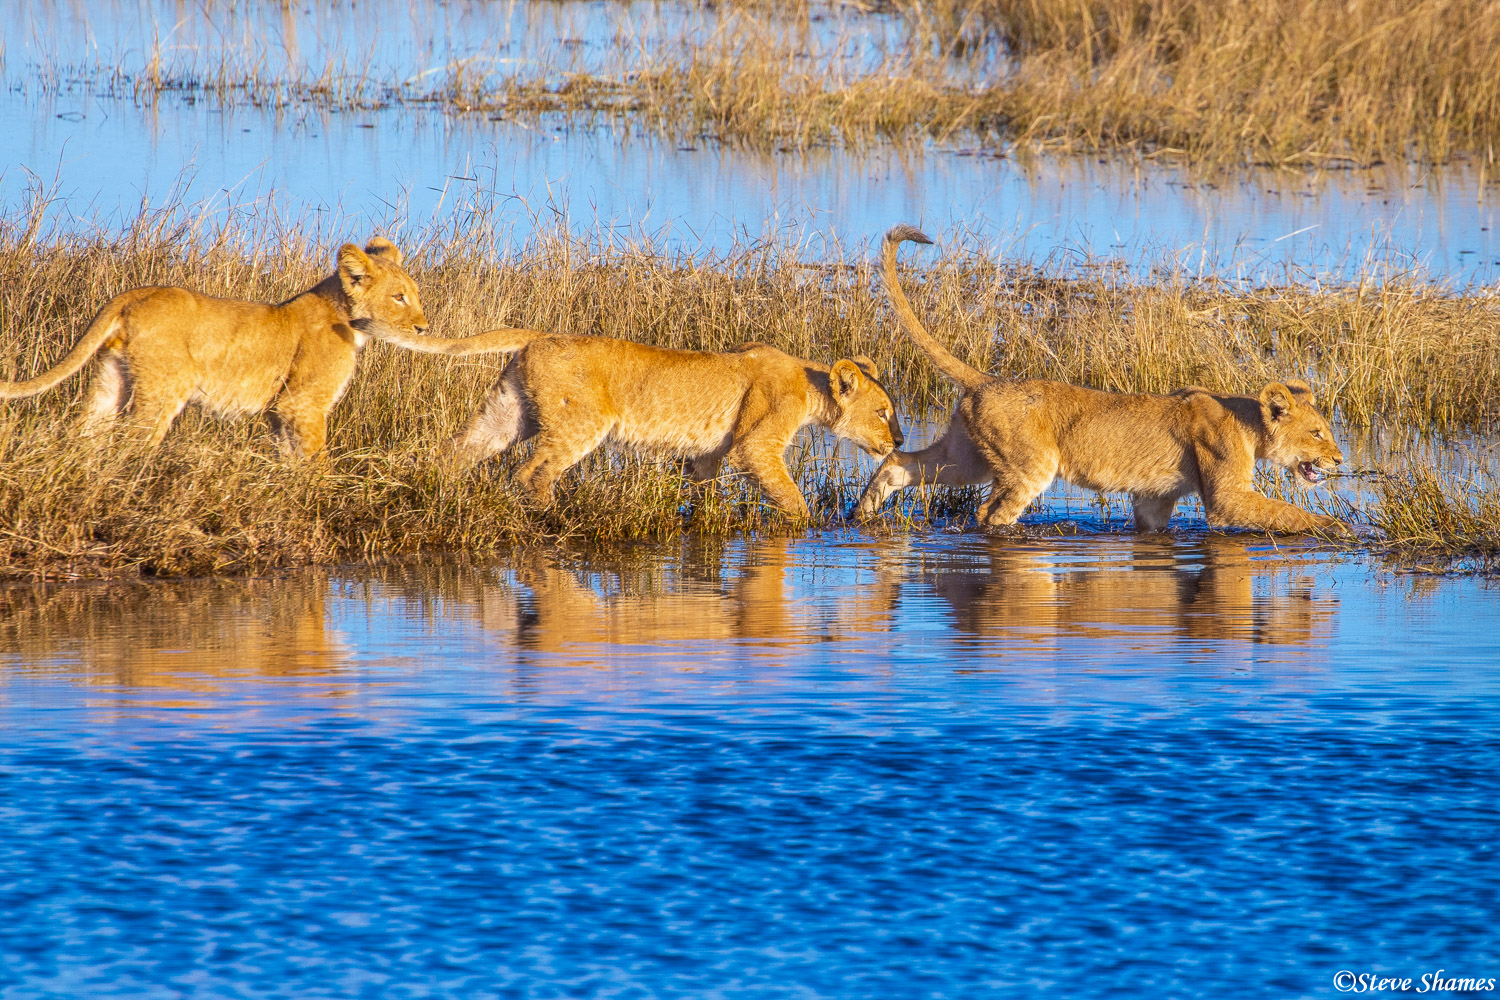 Little lion cubs lining up to cross the water in the marshy area of the Chobe River. They seemed like they didn't want to get...